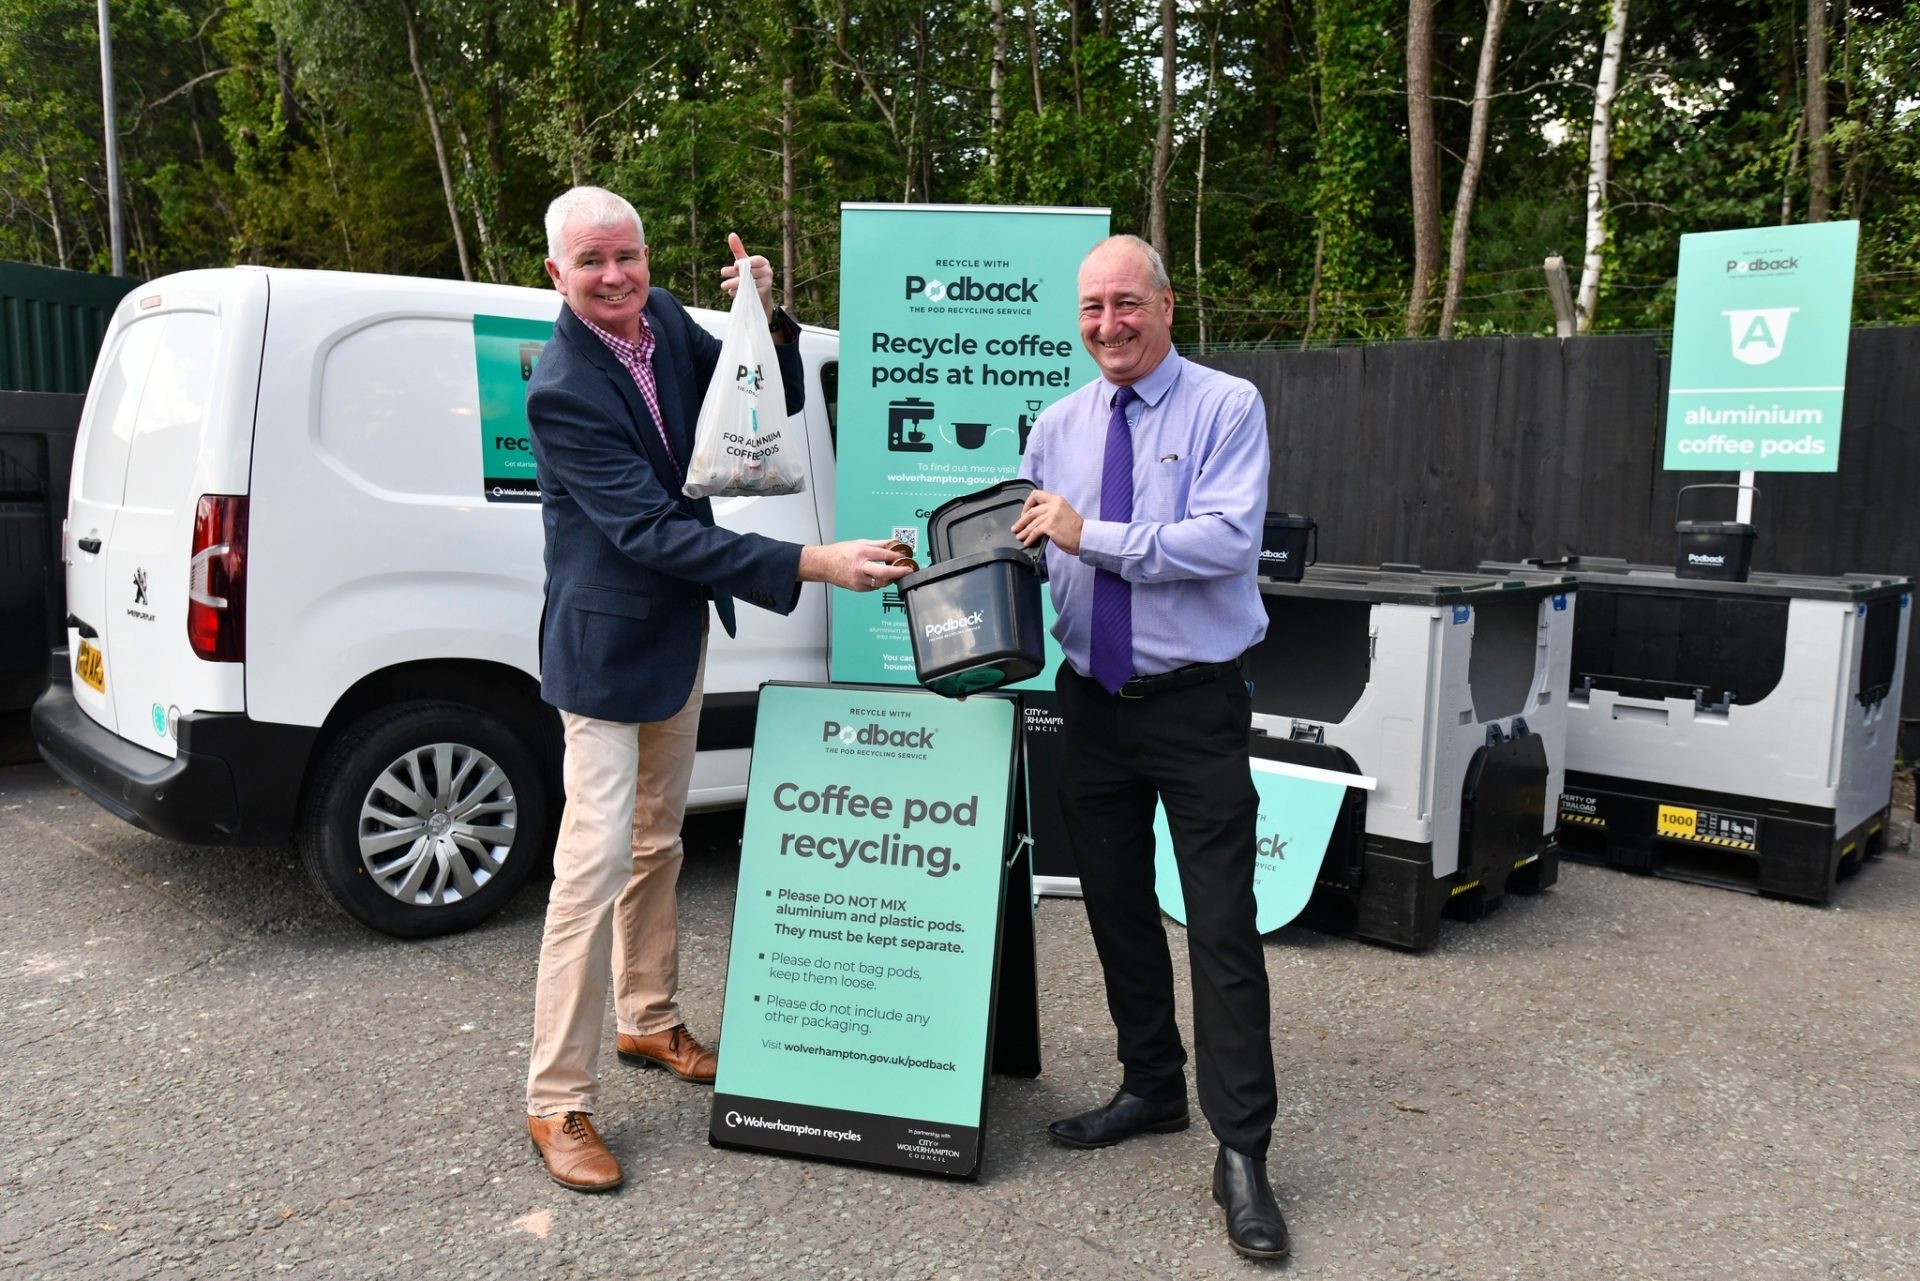 <strong>New coffee pod recycling scheme launches in the city</strong>